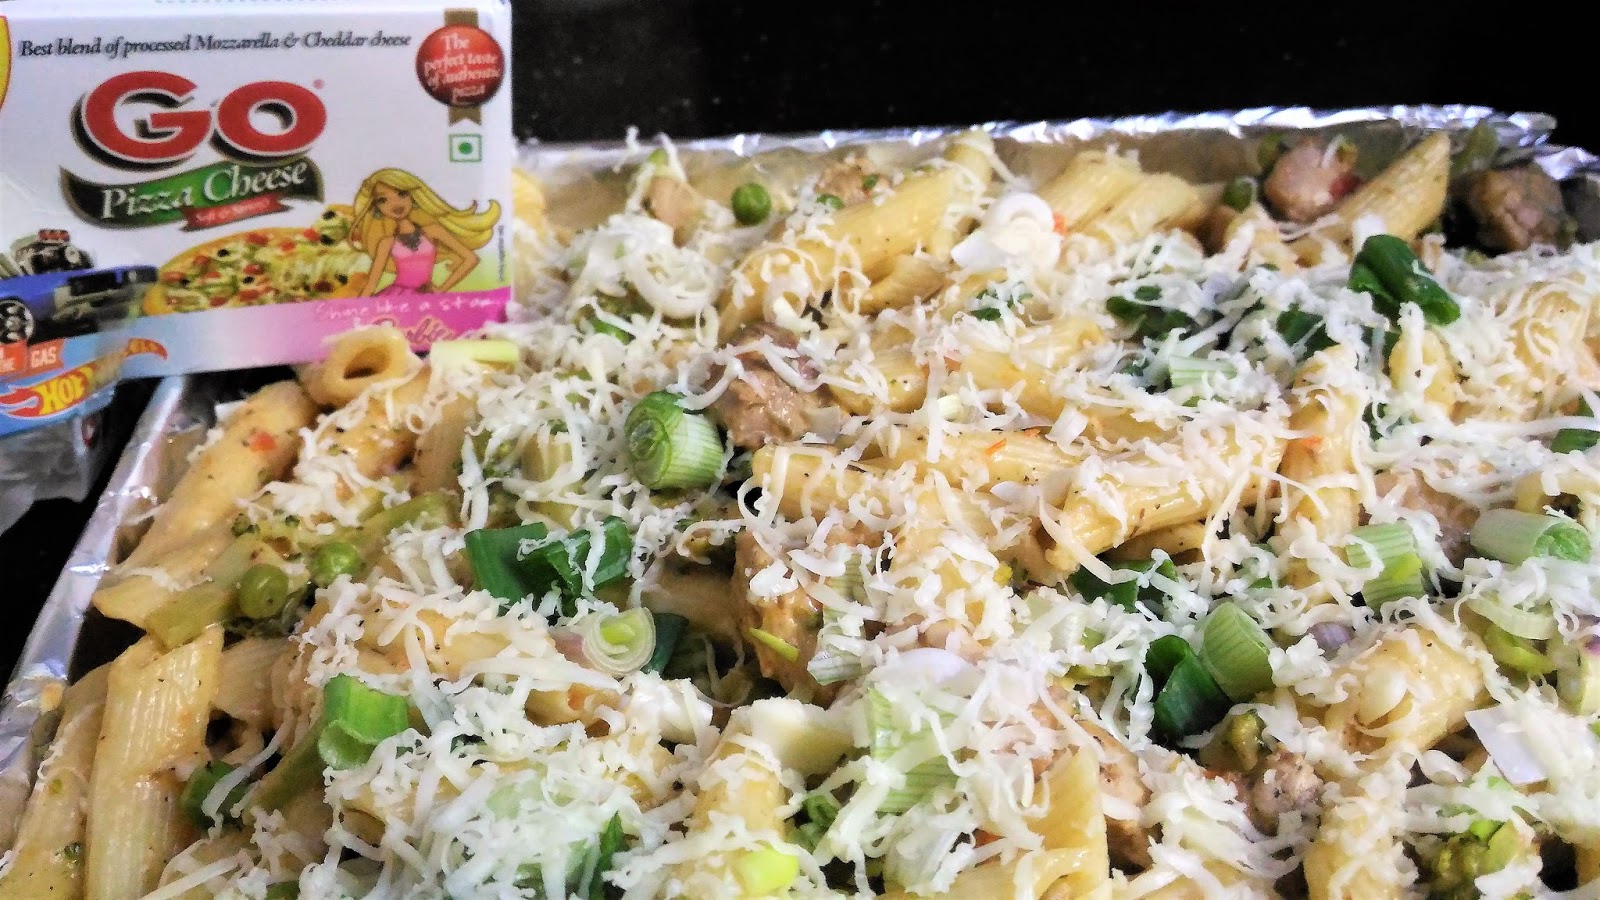 Beauty & Beyond: Easy Chicken & Broccoli Baked Penne Pasta with Go Cheese